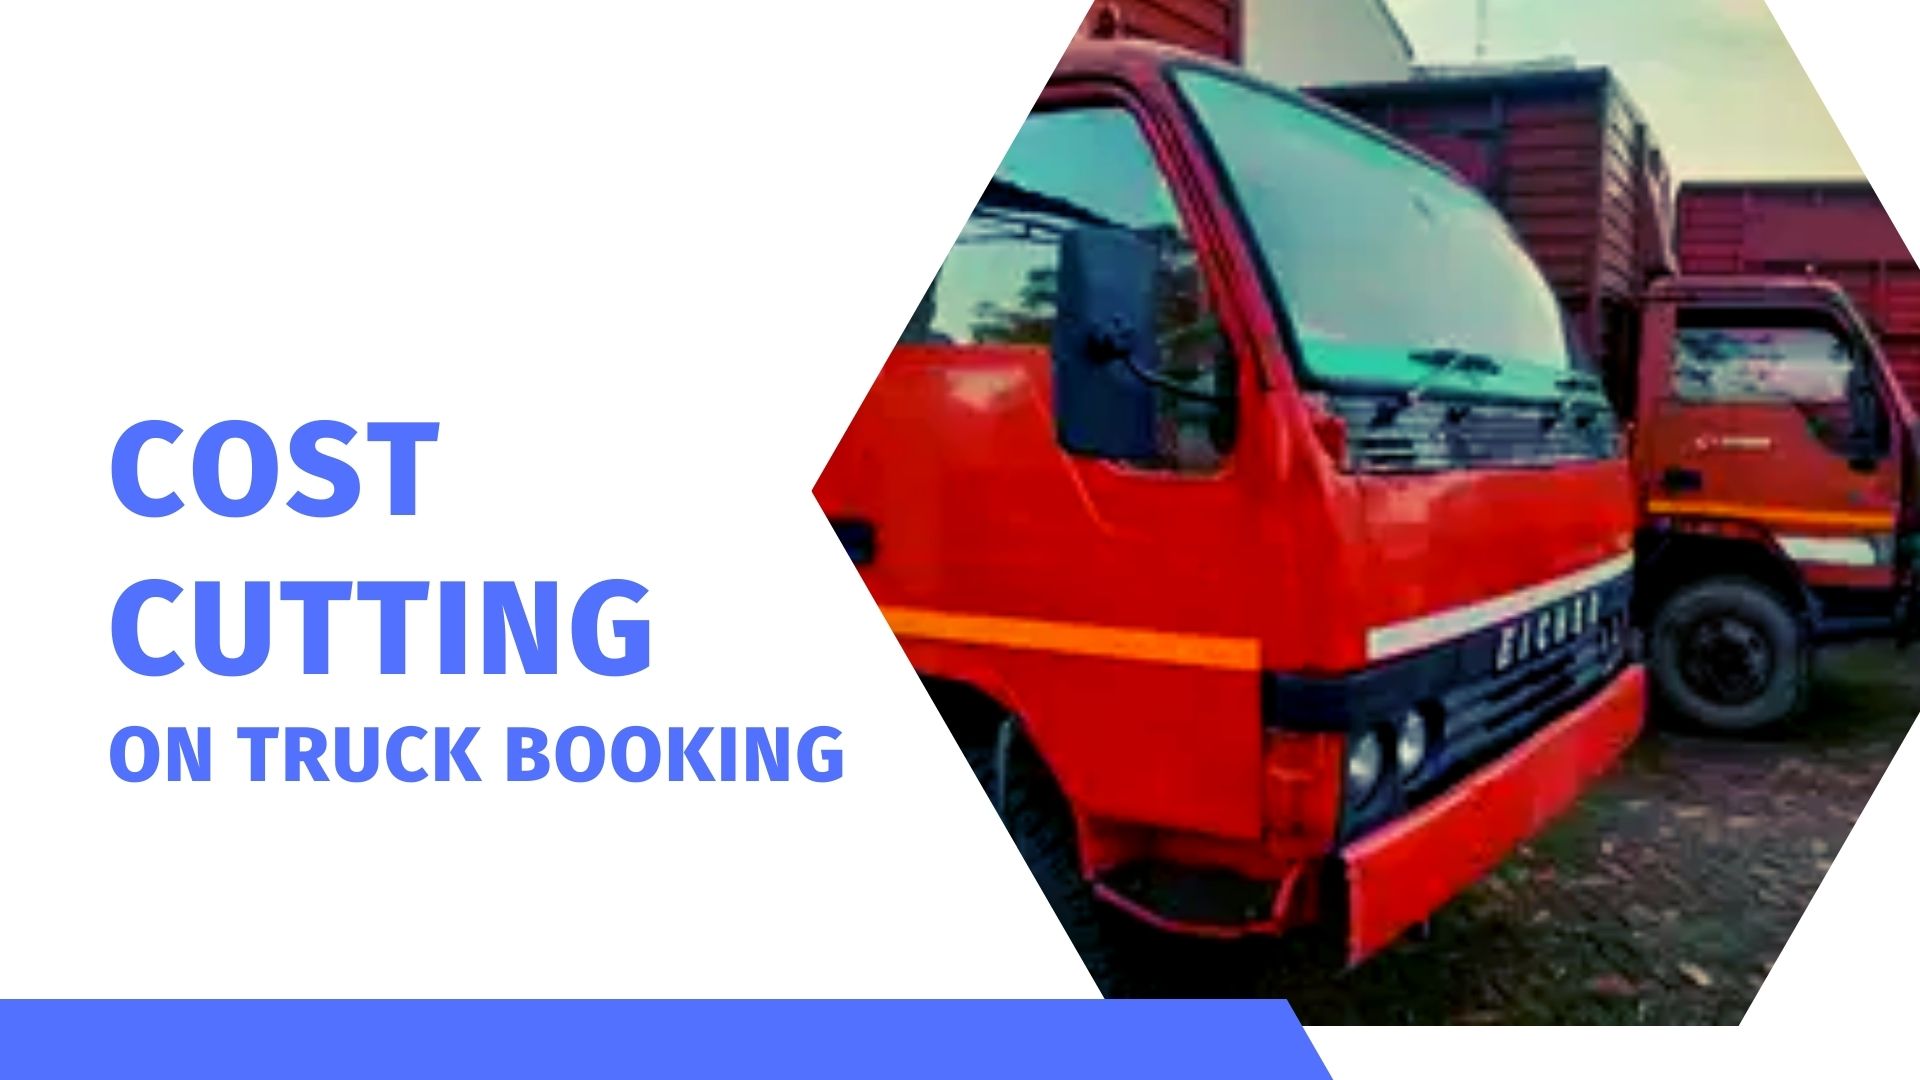 Cost Cutting on truck booking